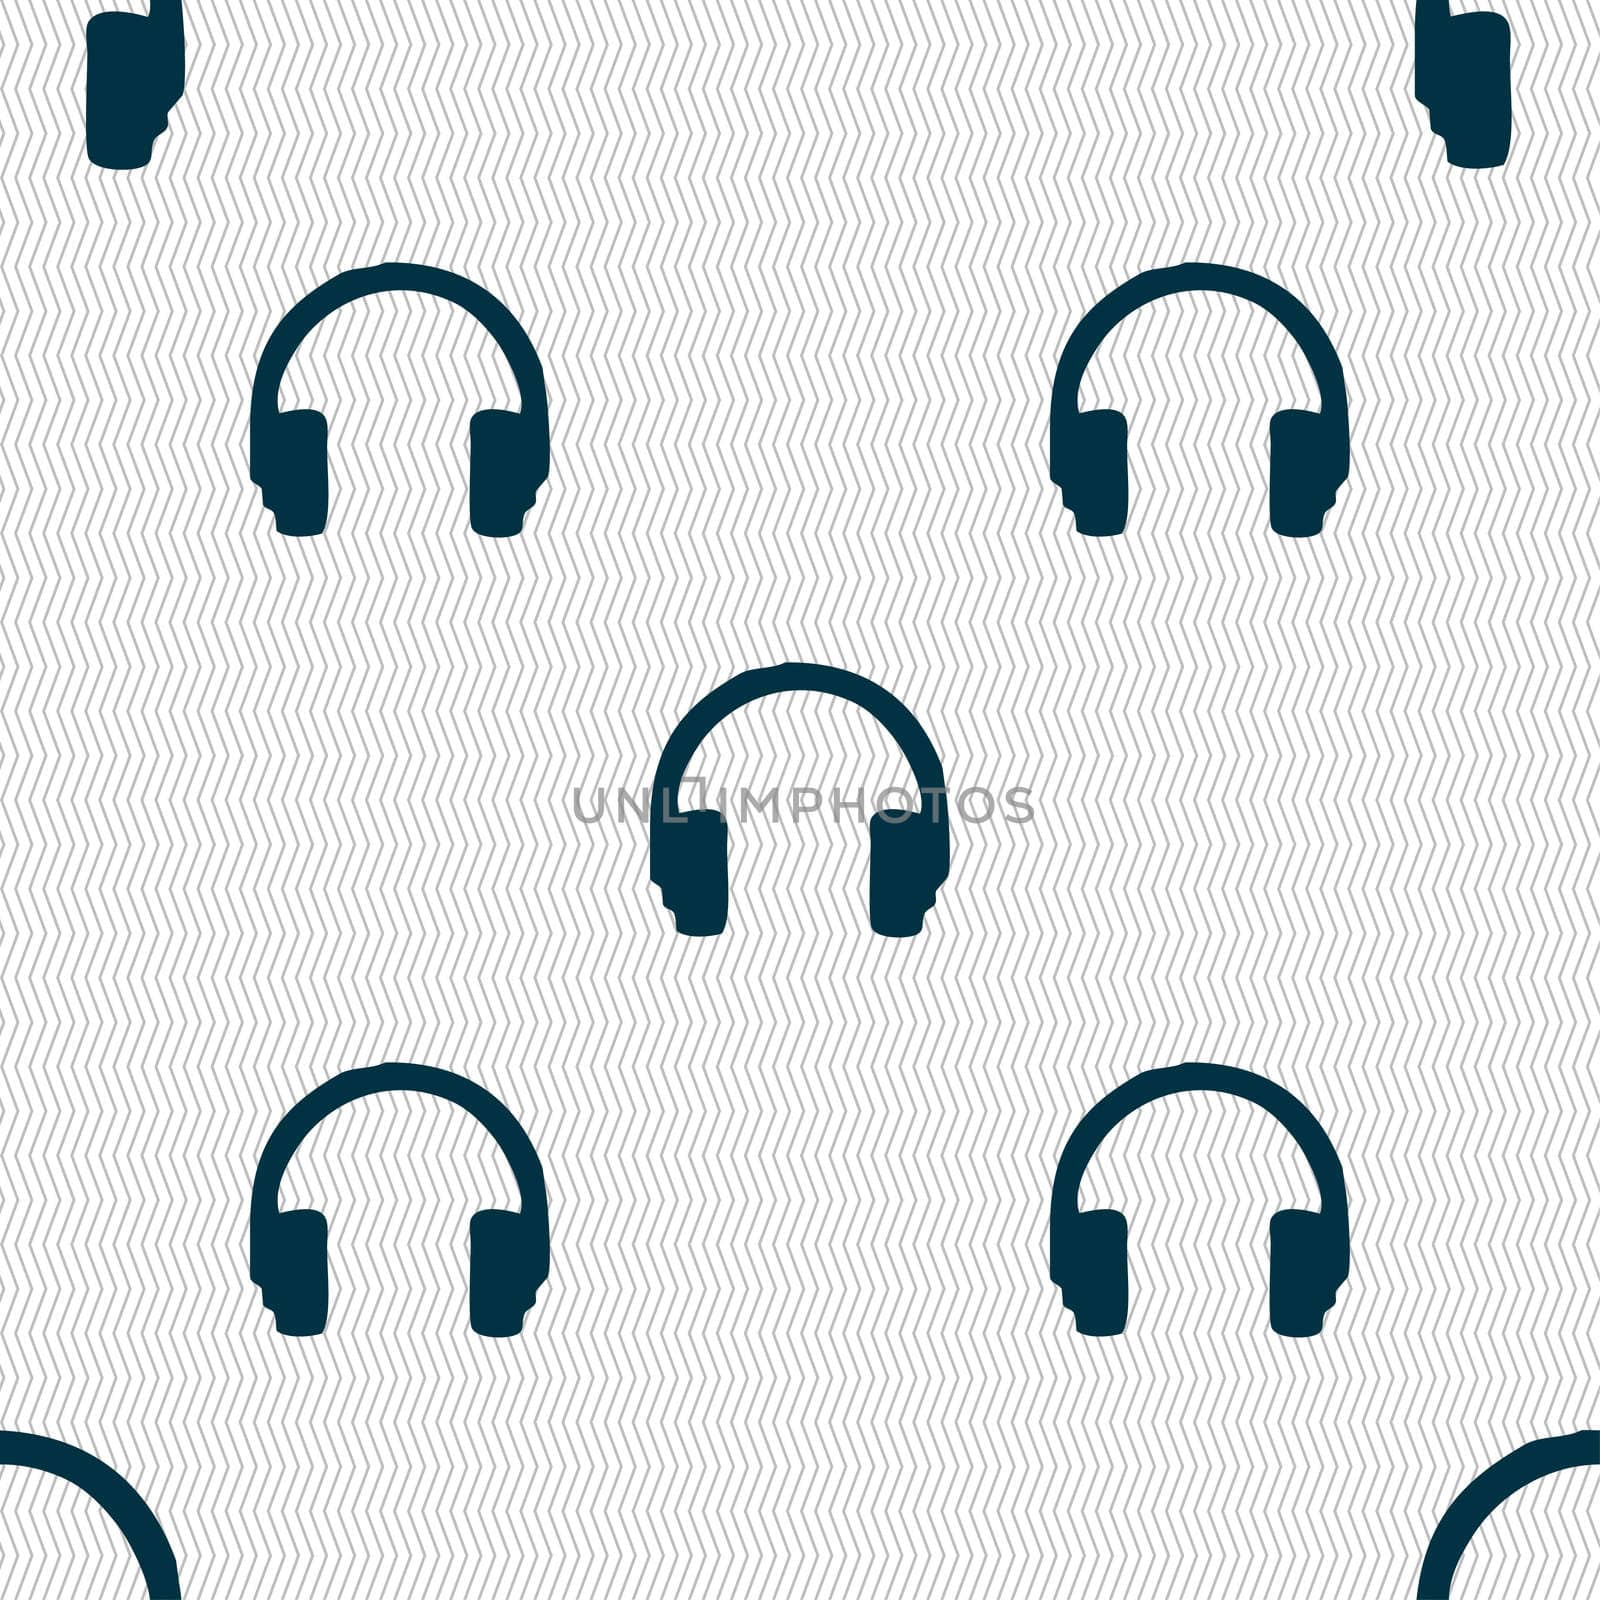 headsets icon sign. Seamless pattern with geometric texture. illustration